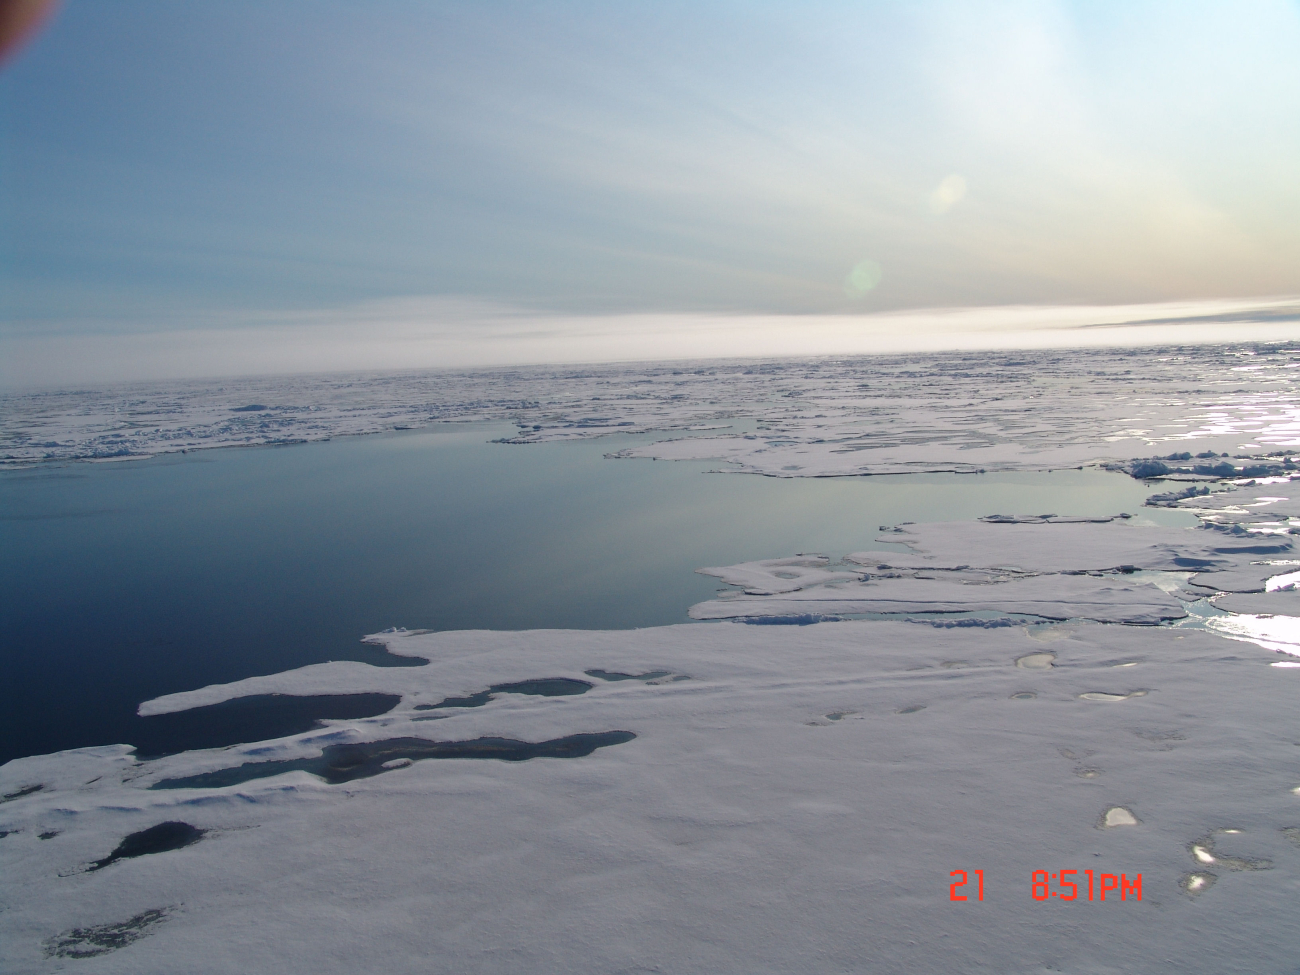 A small polynya (area of open water surrounded by sea ice)